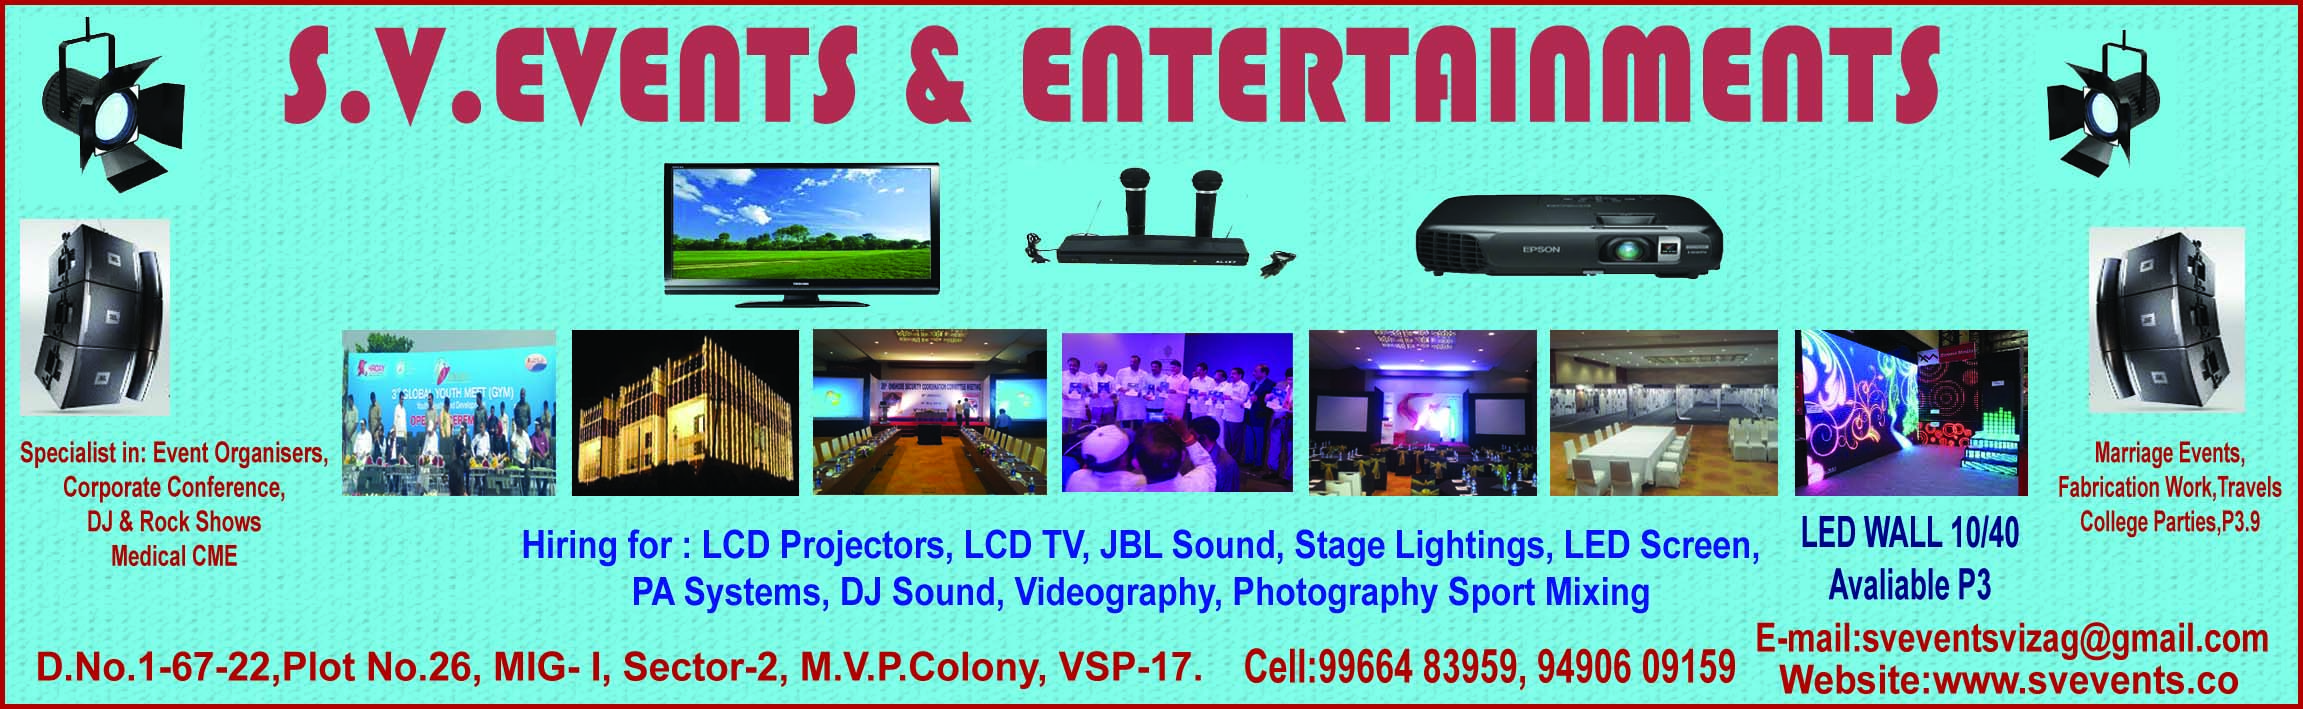 S.V.EVENTS & ENTERTAINMENTS